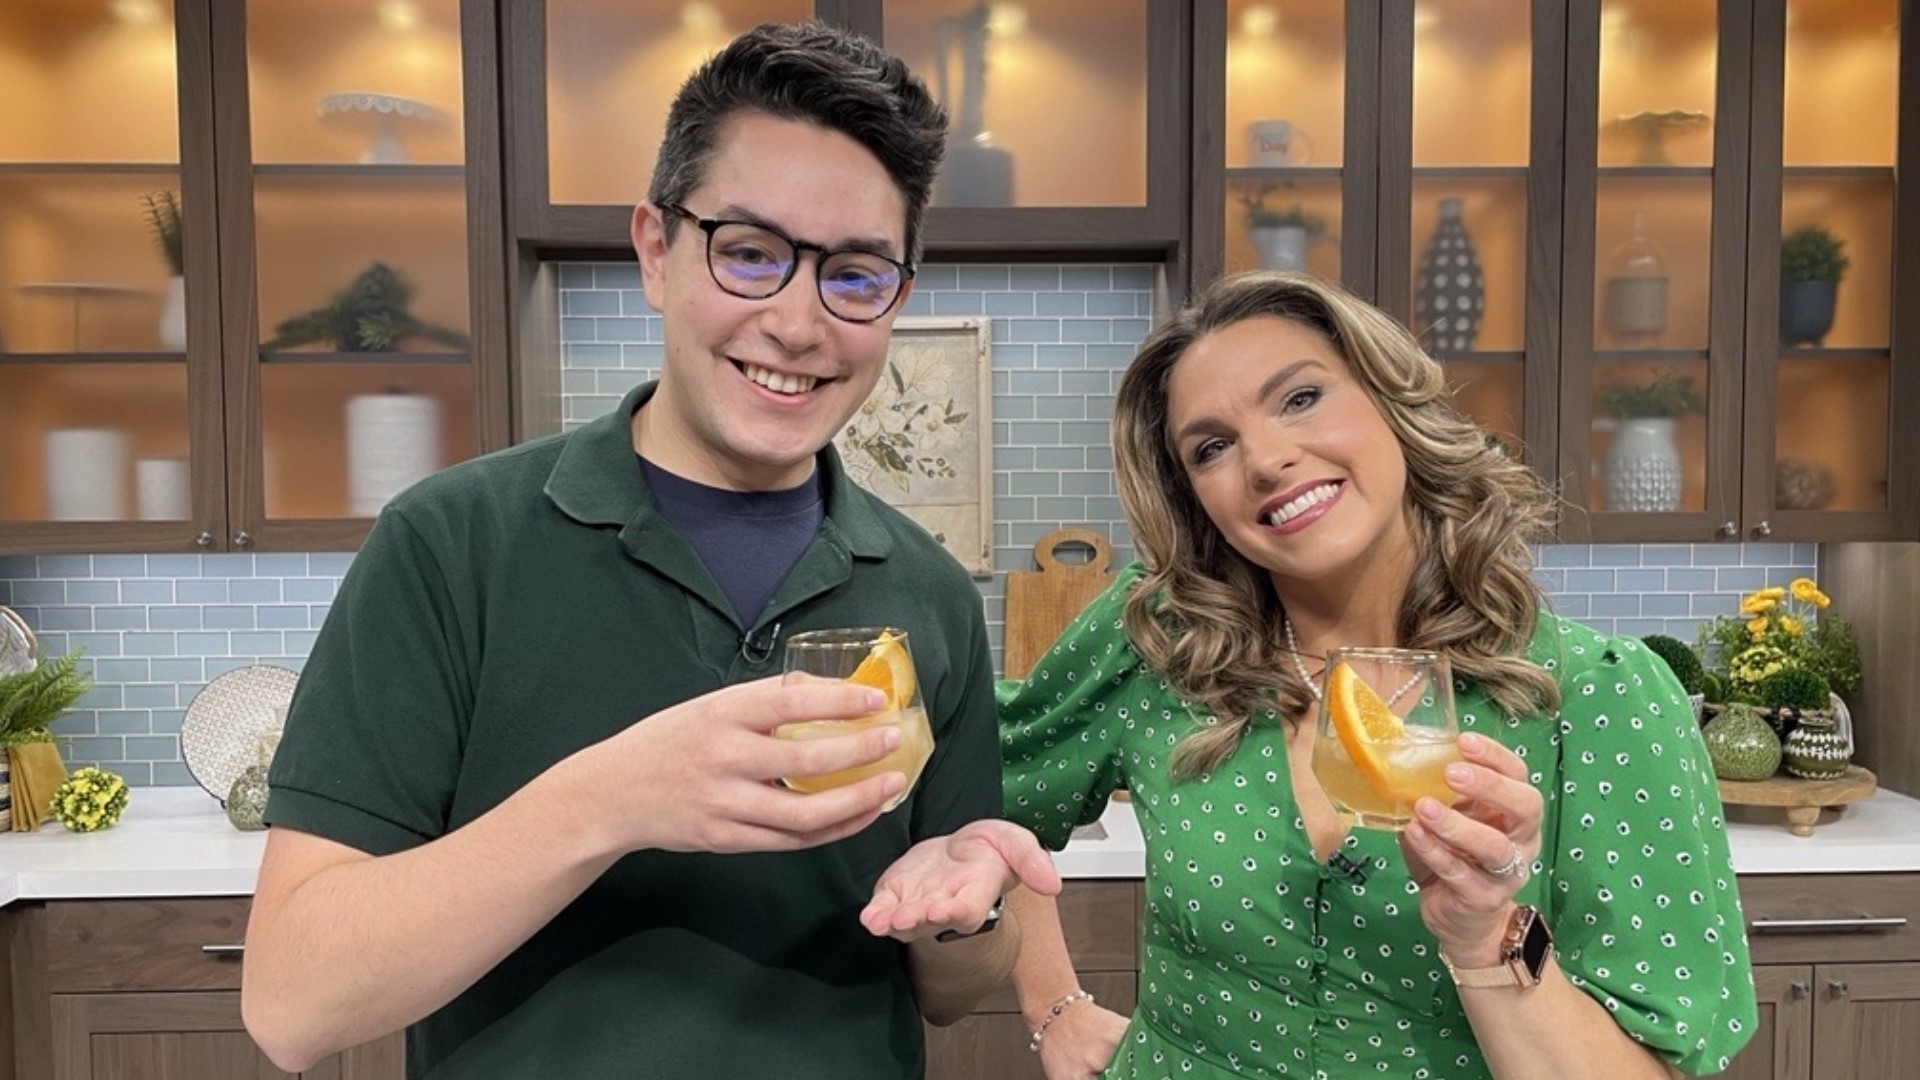 Allen Katz, founder of NYDC, joined New Day NW to talk Old Fashioneds and how to make one using NYDC whiskey. #newdaynw